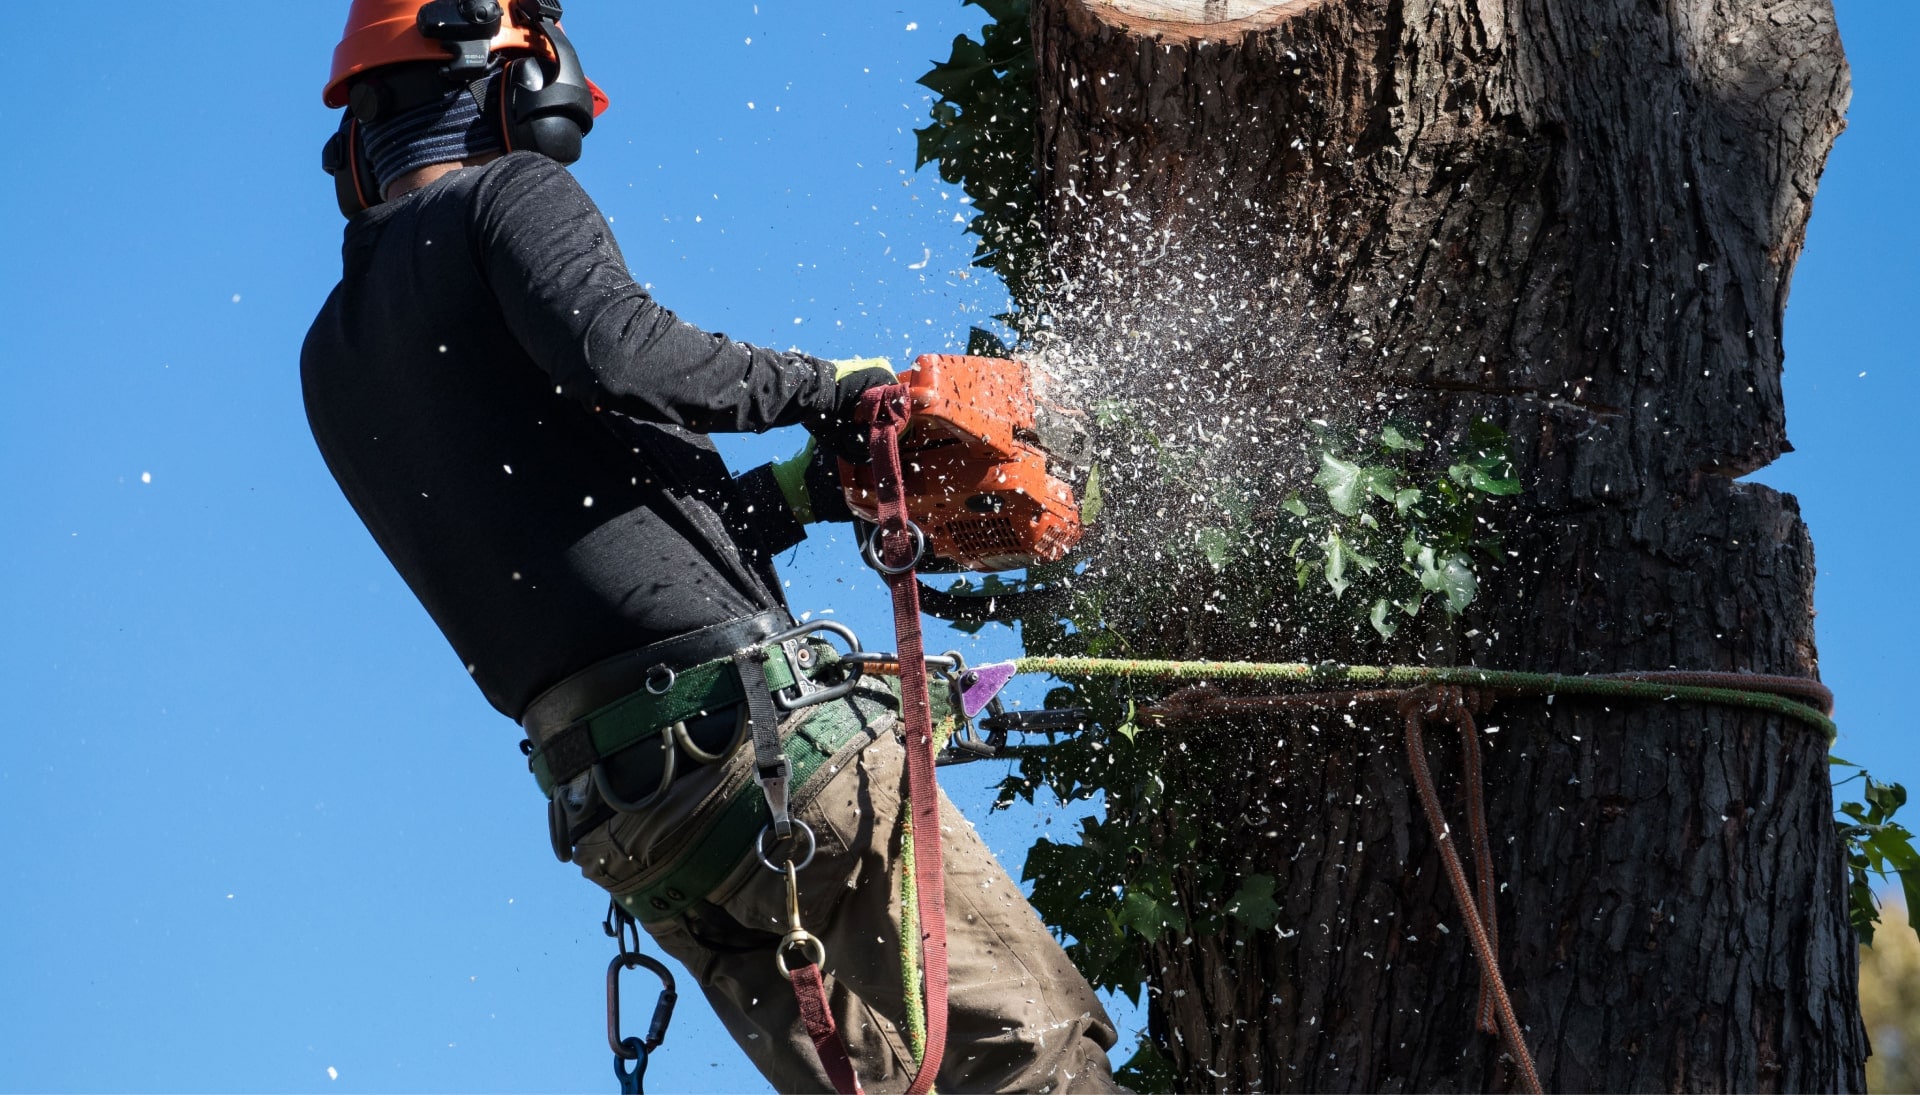 A tree removal expert is high in tree to cut down stump in Albany, New York